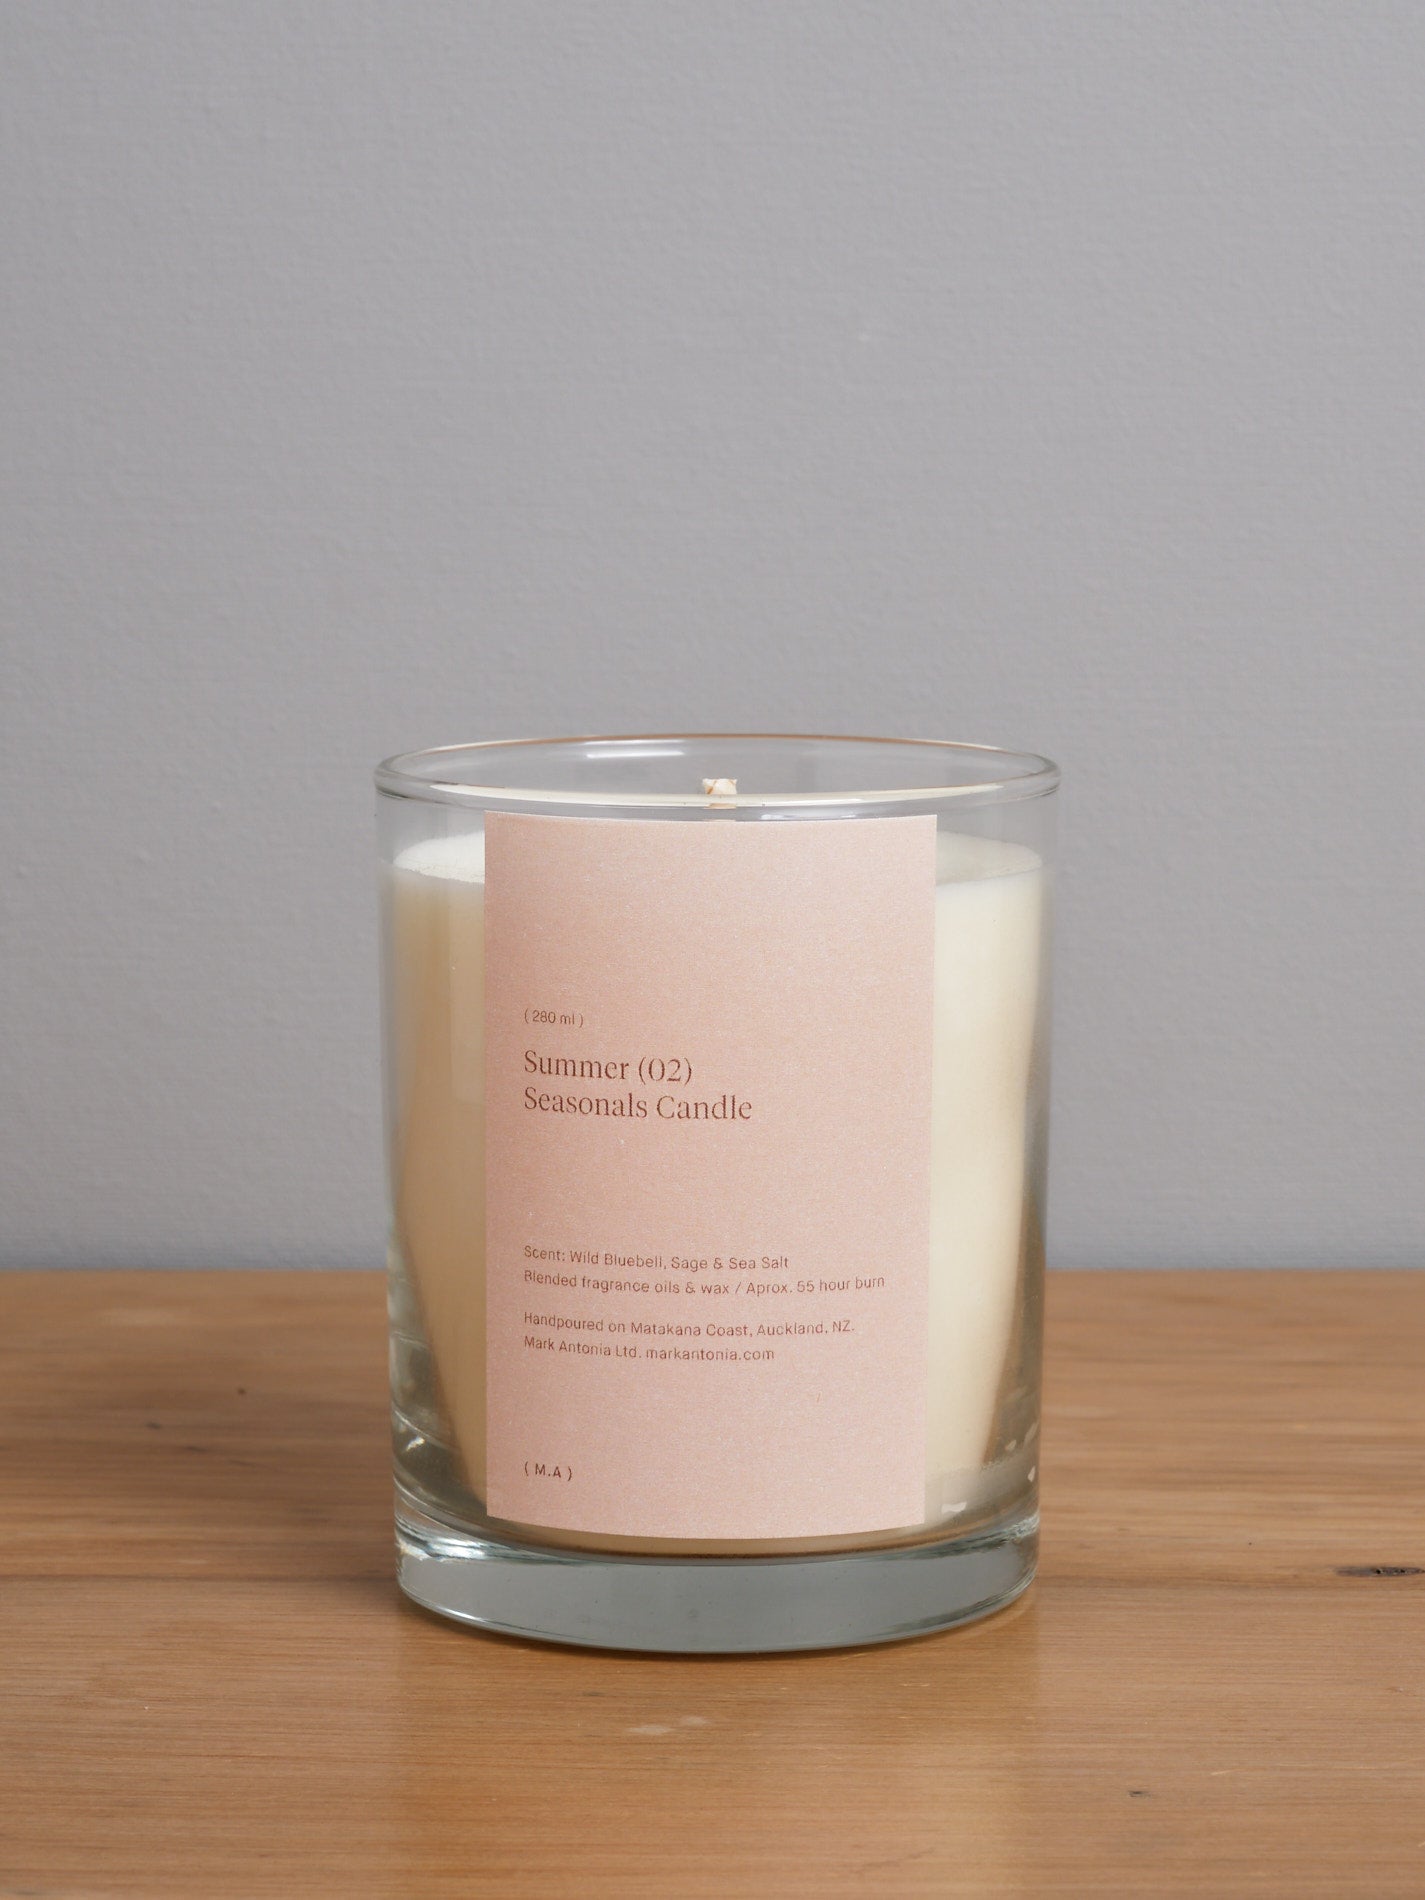 A Seasonal Candle (2.0) – Summer by Mark Antonia with a pink label on it sitting on a wooden table.